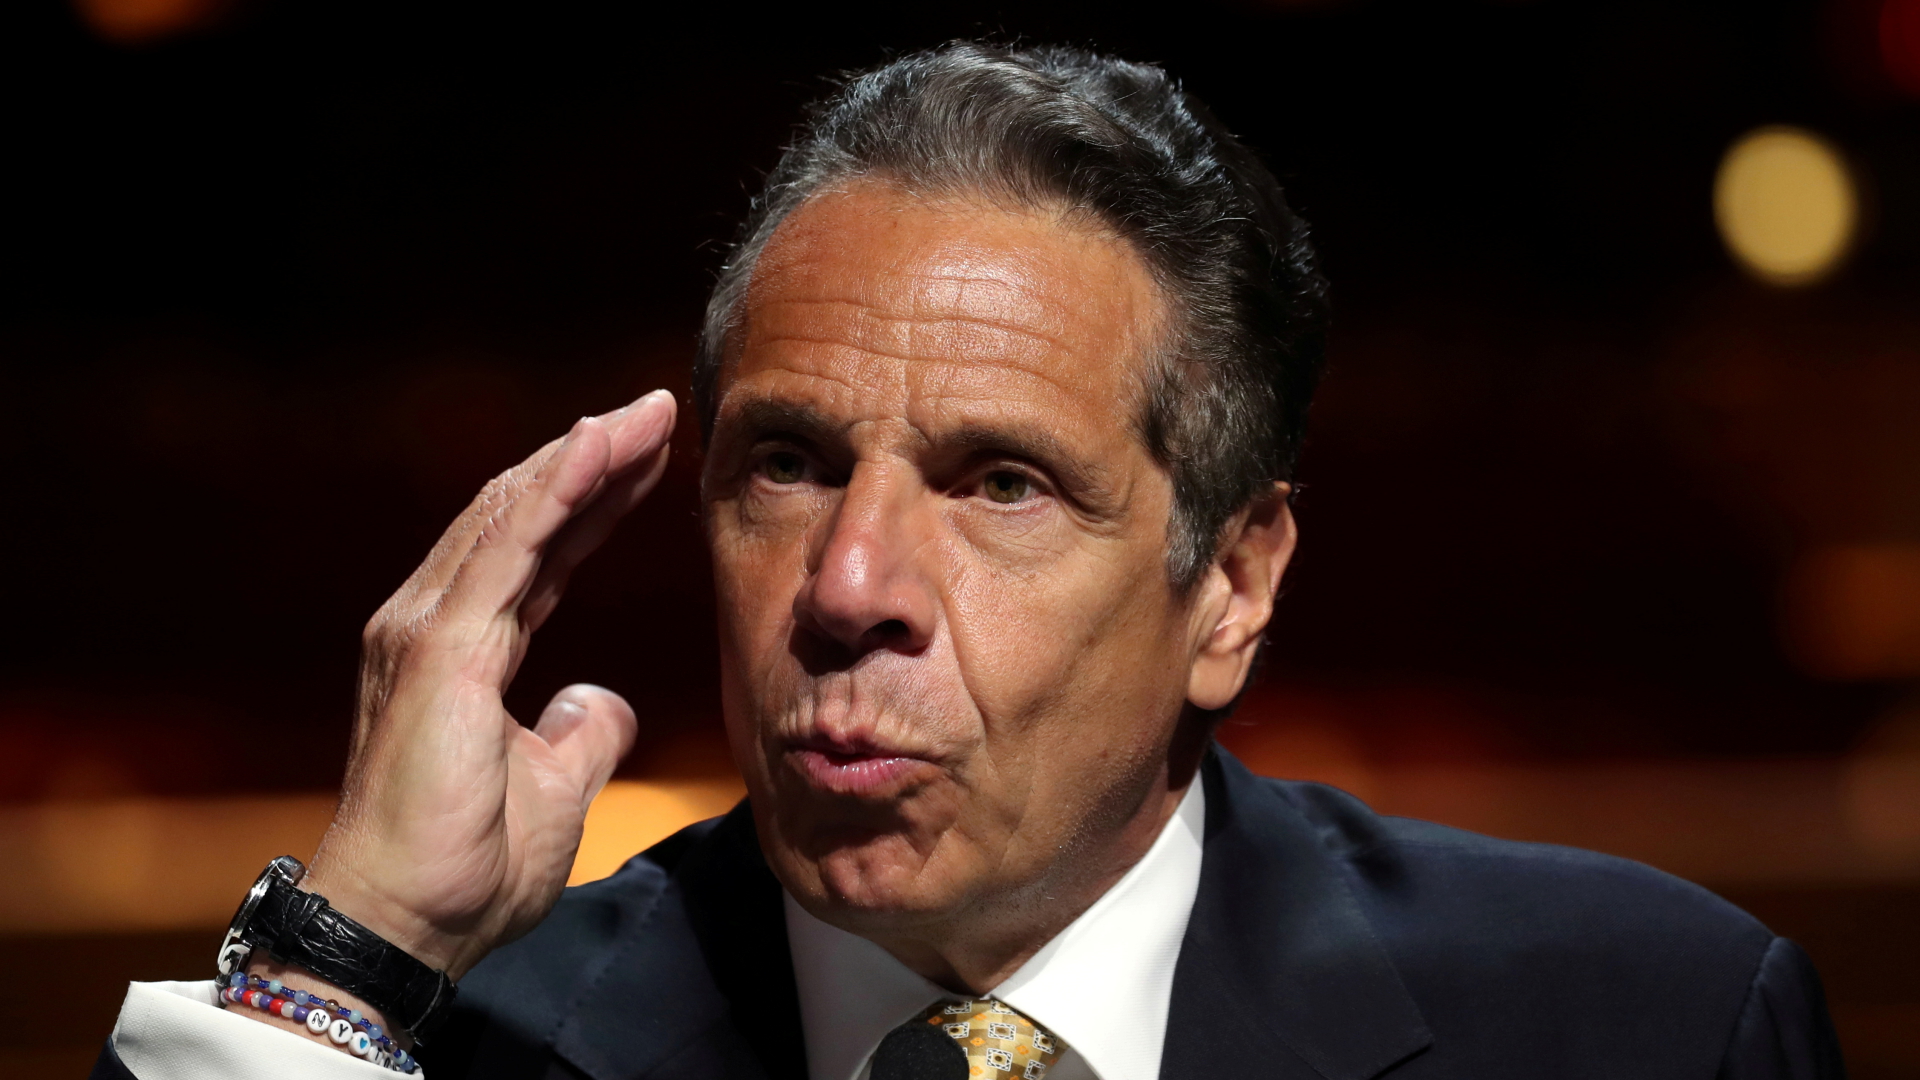 Der New Yorker Gouverneur Andrew Cuomo. | REUTERS